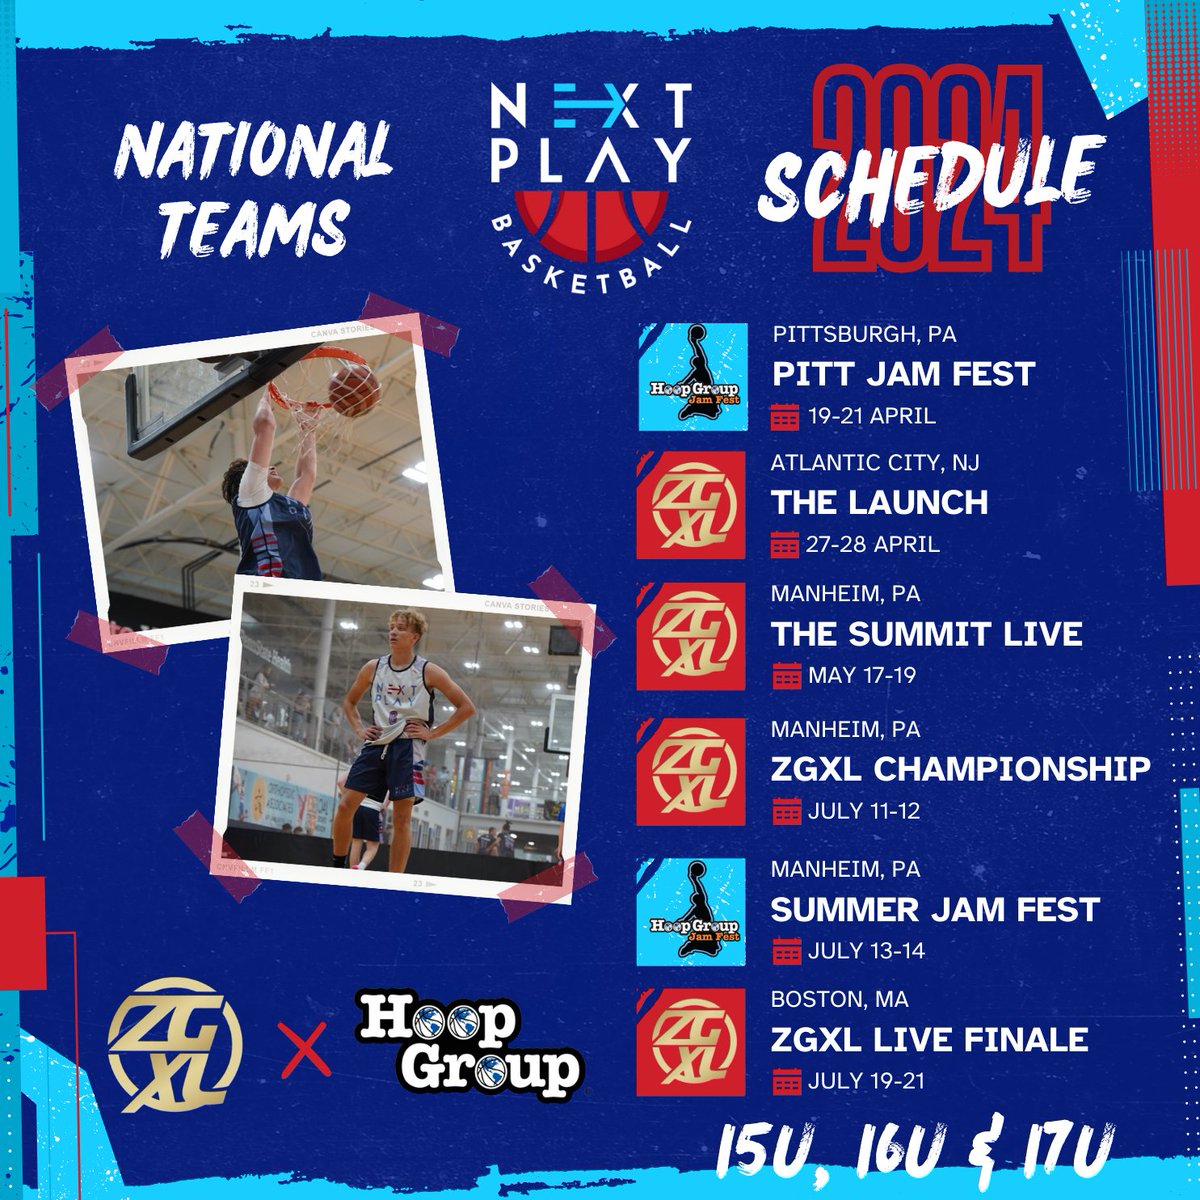 🚨High School Athletes🚨 We are still looking for a limited number of high-level players to round out our National Team rosters. #NextPlay #Family @ZeroGravityXL @TheHoopGroup Drop your film📷, DM us or email jake@nextplaybasketball.com